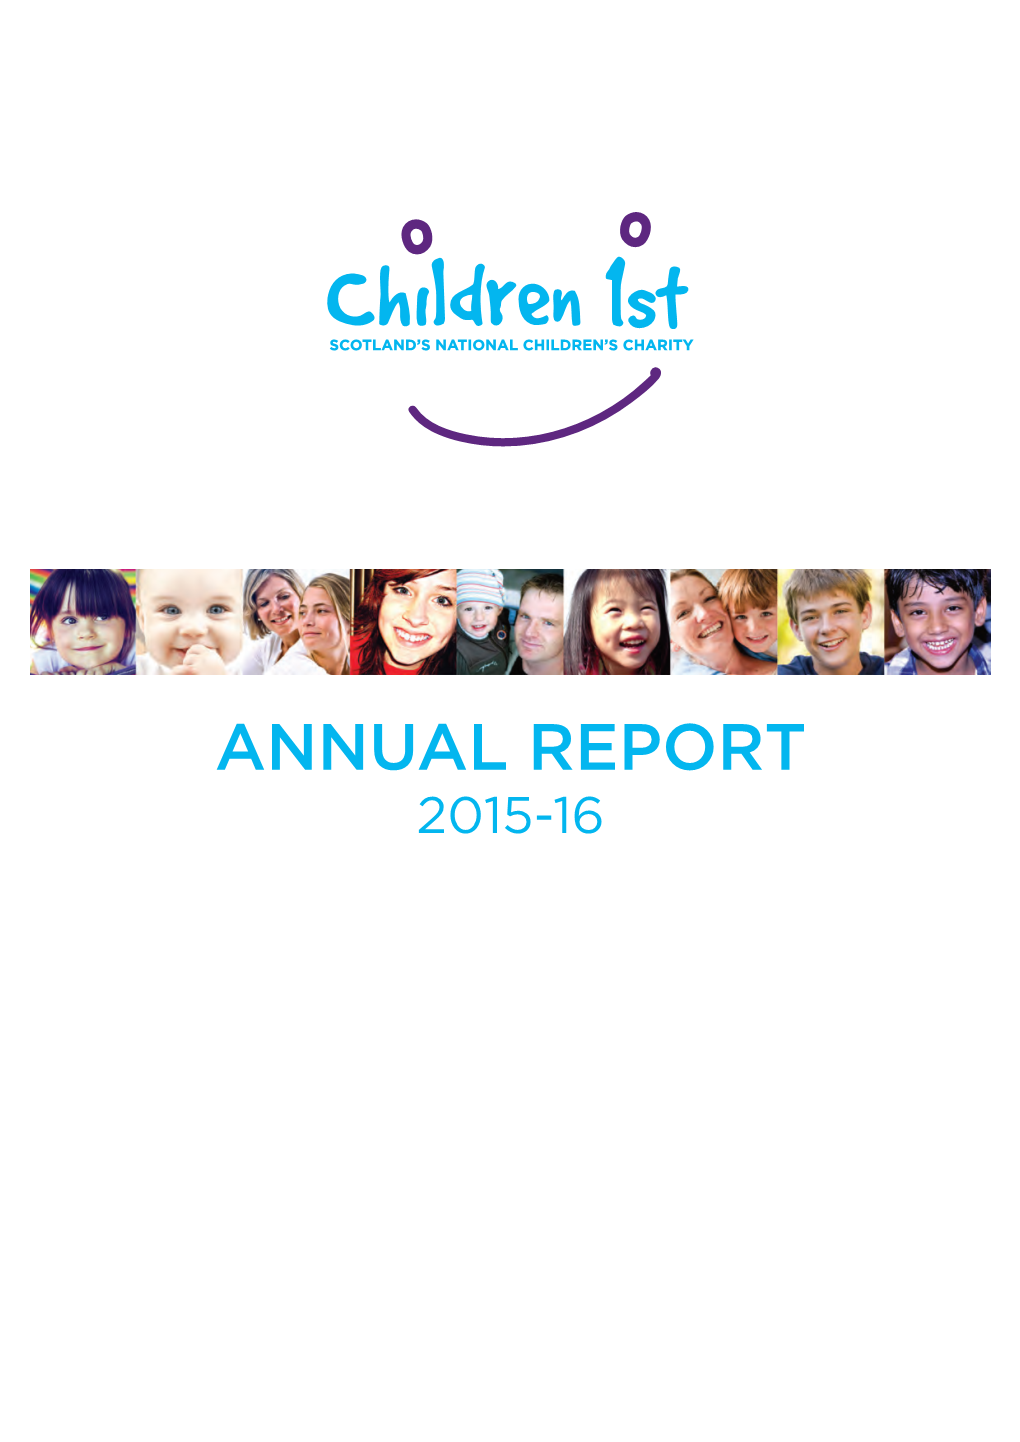 Annual Report 2015-16 Contents